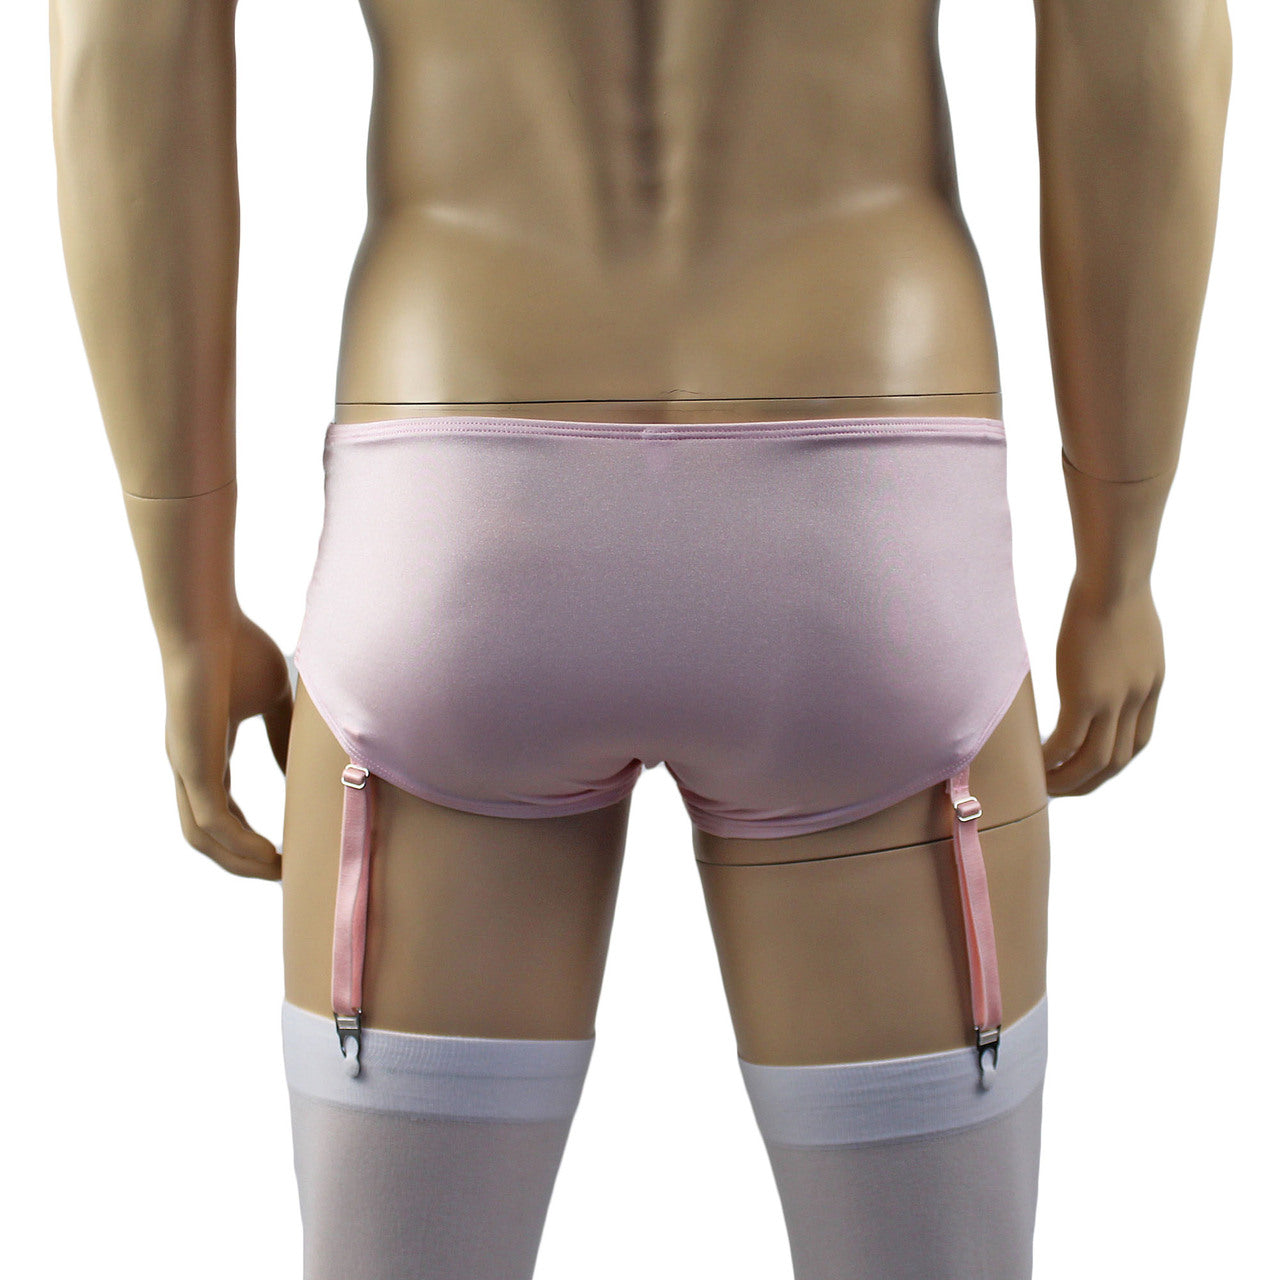 Mens Luxury Bra Top and Boxer Brief with Garters & Stockings Pink